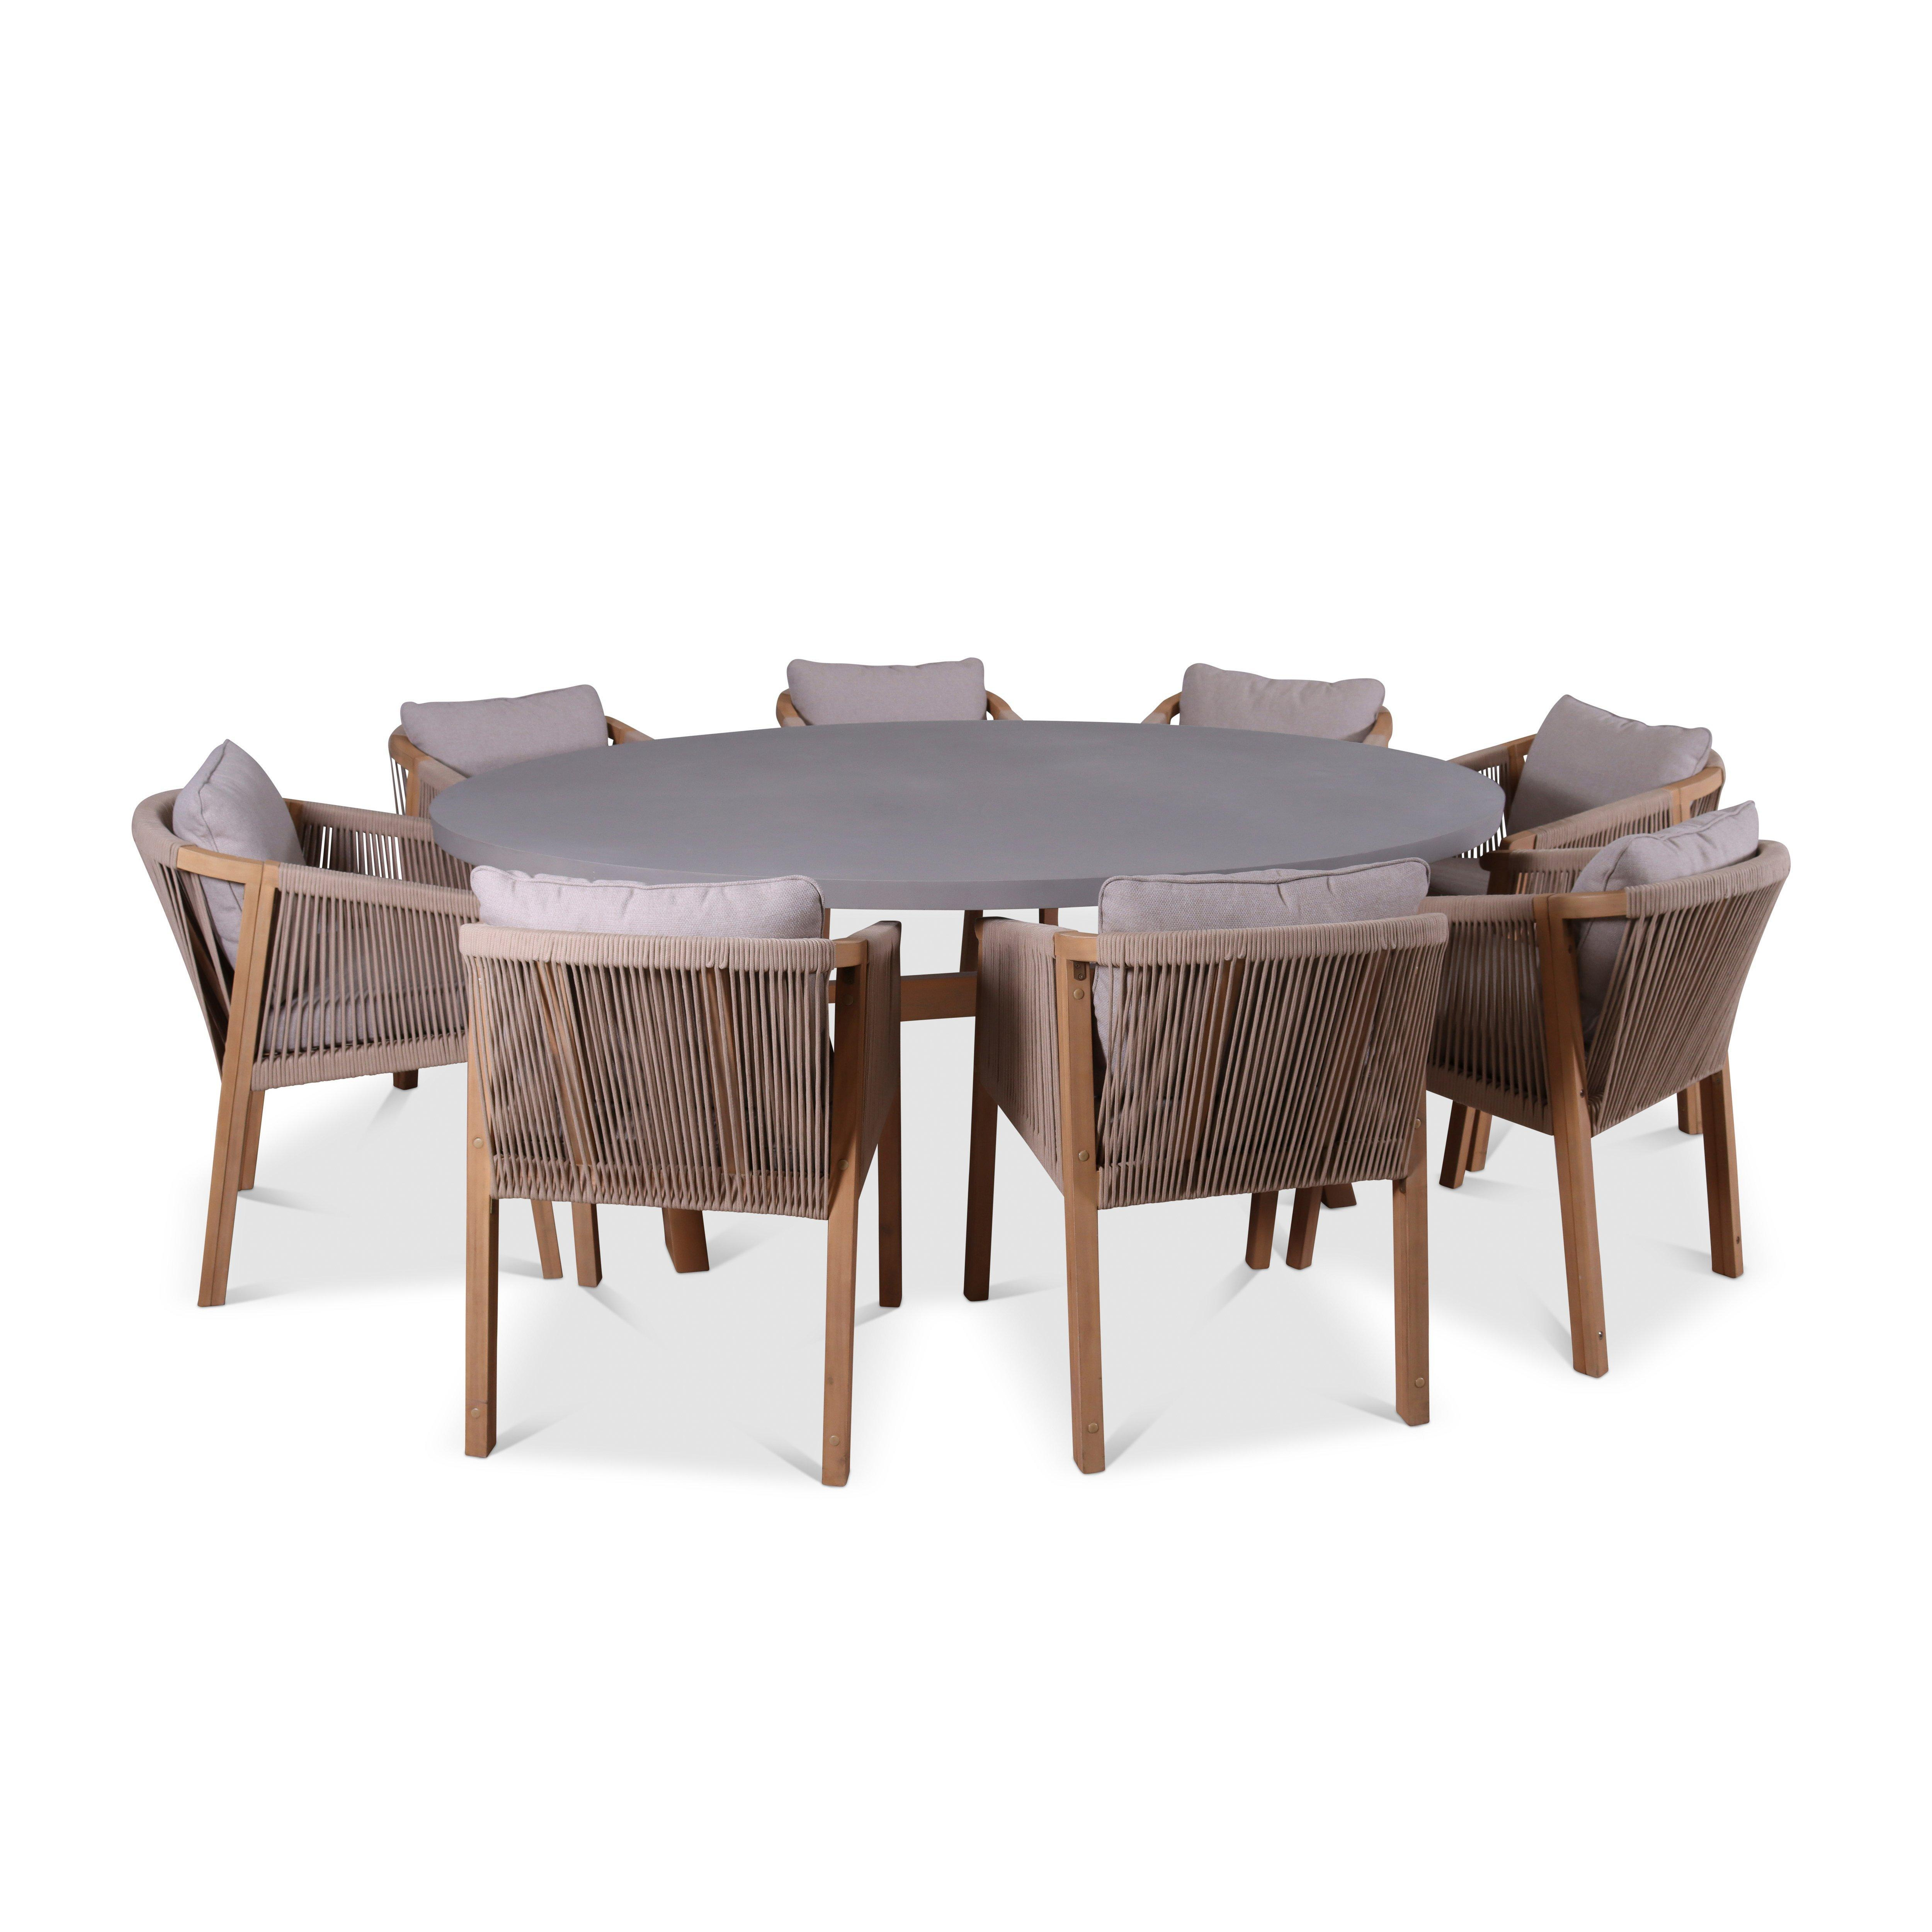 LUNA 200x140cm Ellipse concrete table with 8 Roma Dining Chairs - image 1